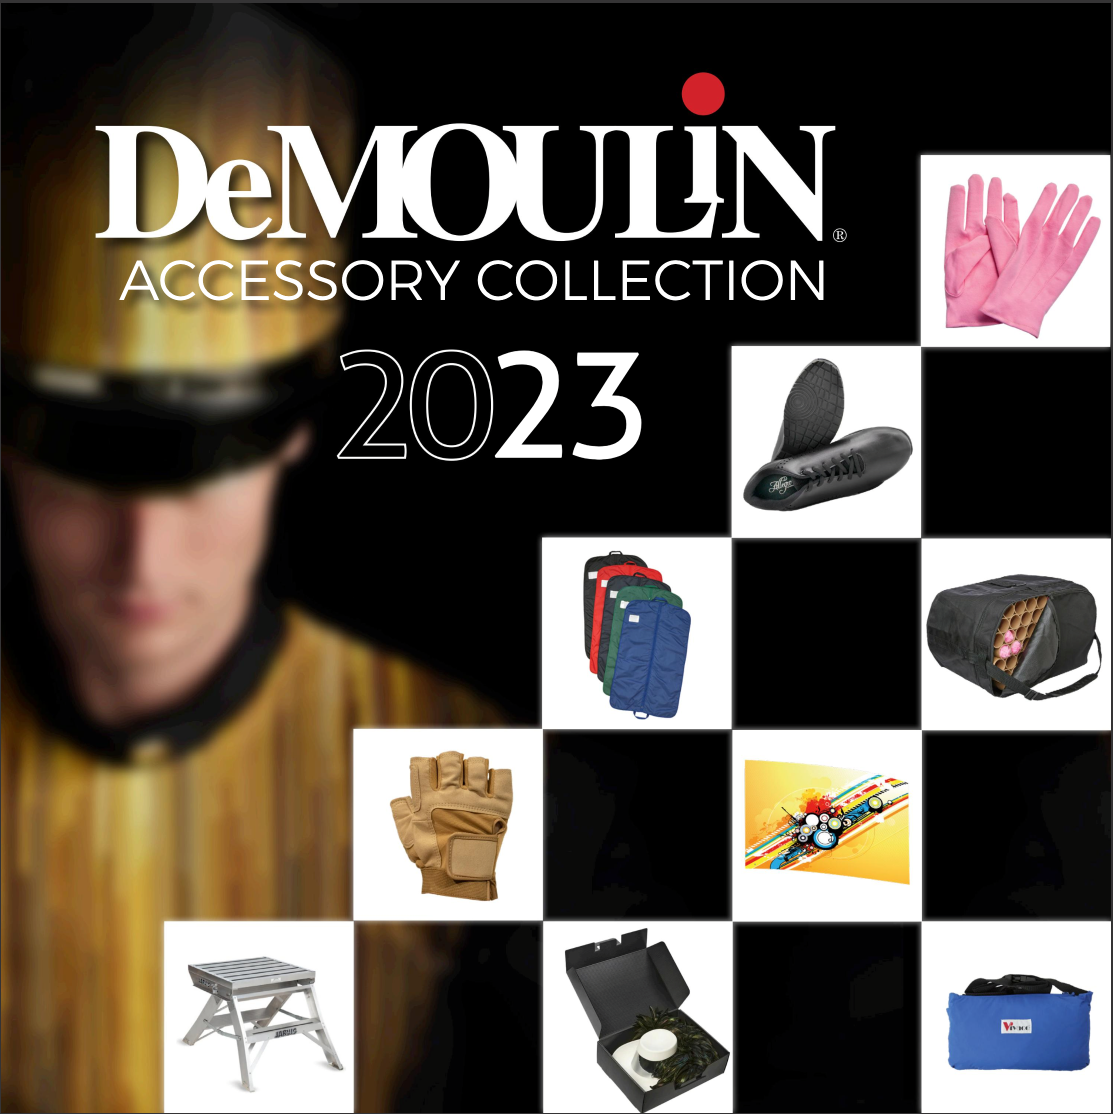 The 2023 DeMoulin Accessory Collection